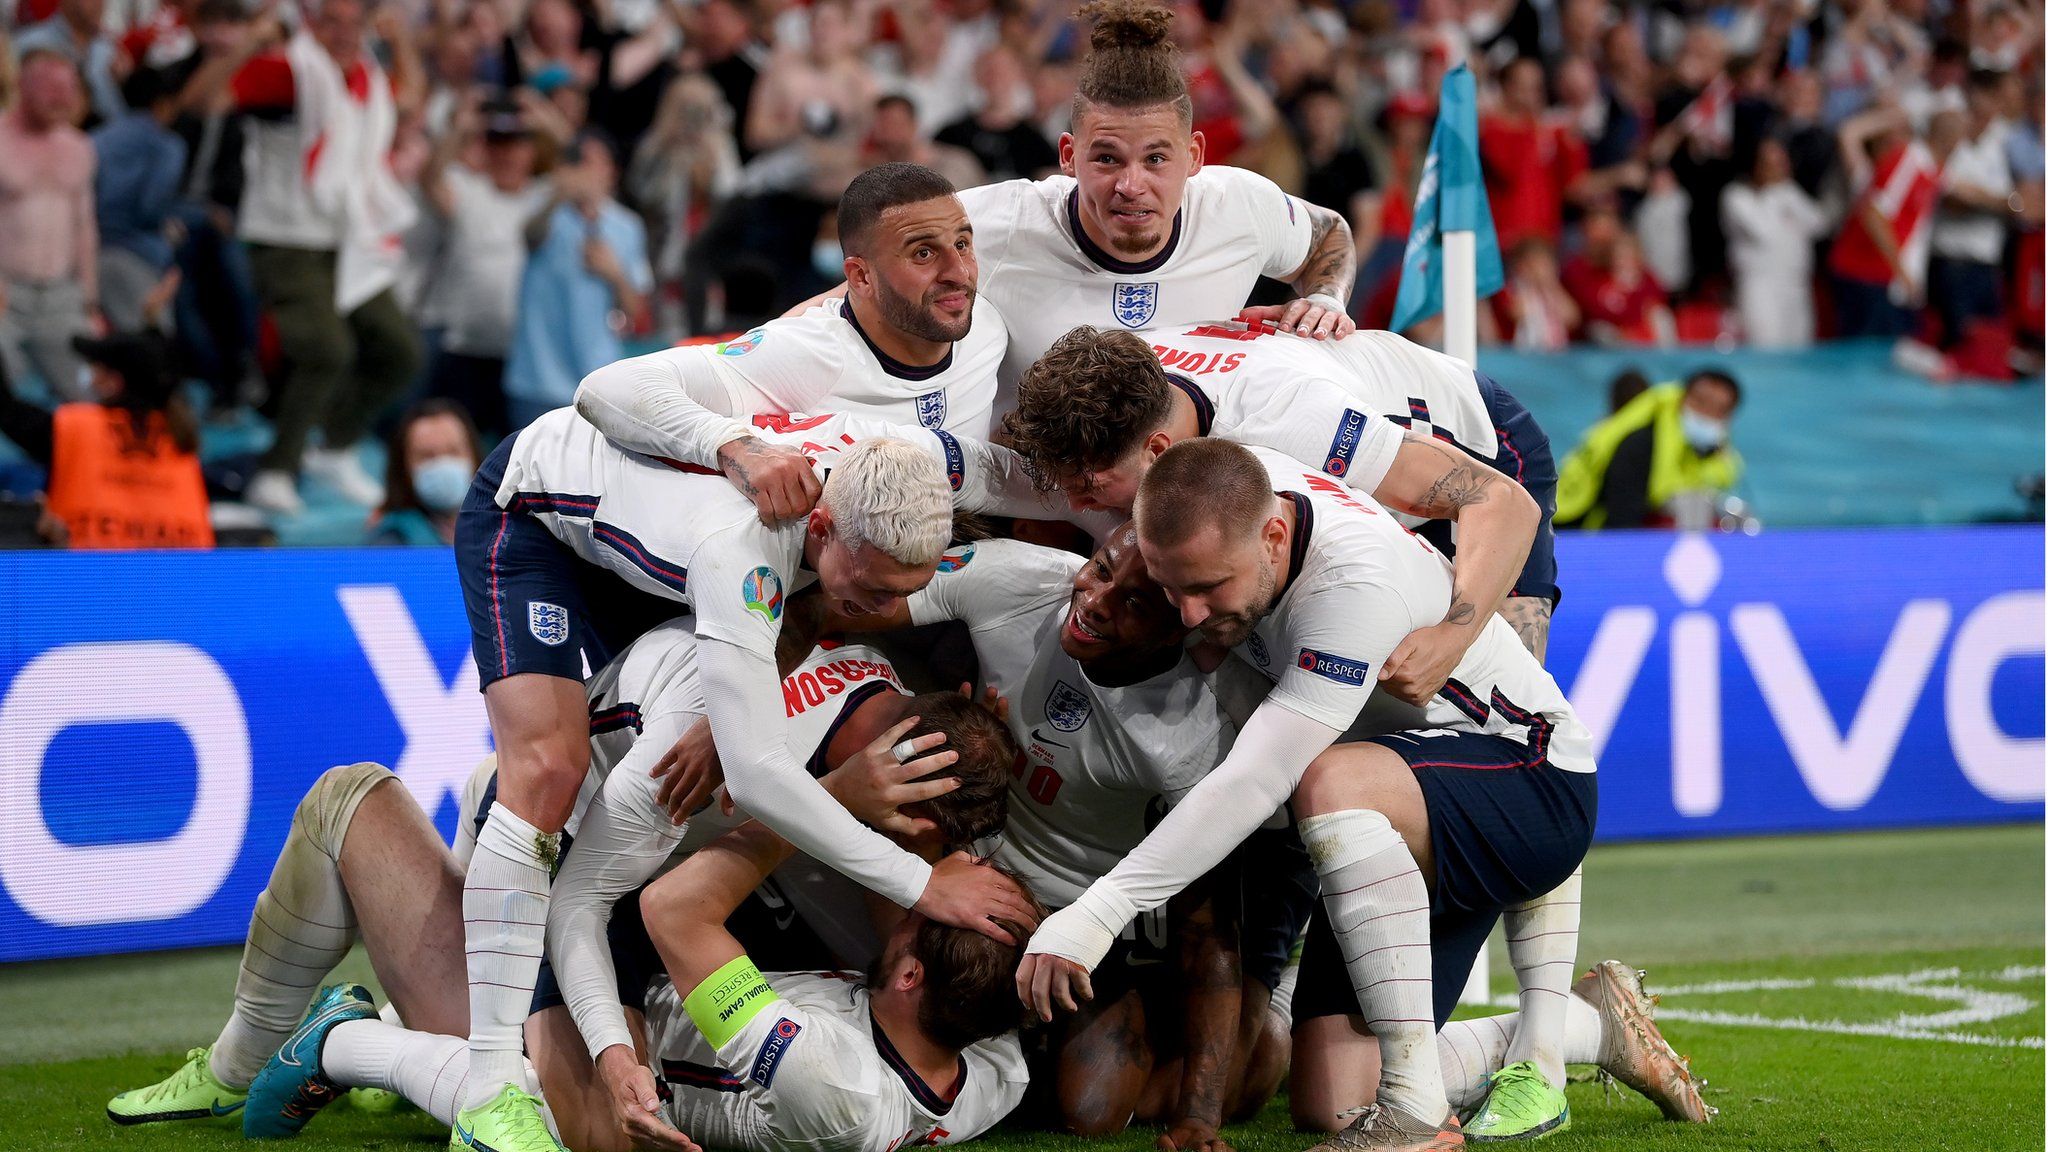 England's players celebrate after scoring against Denmark in the Euro 2020 semi-finals